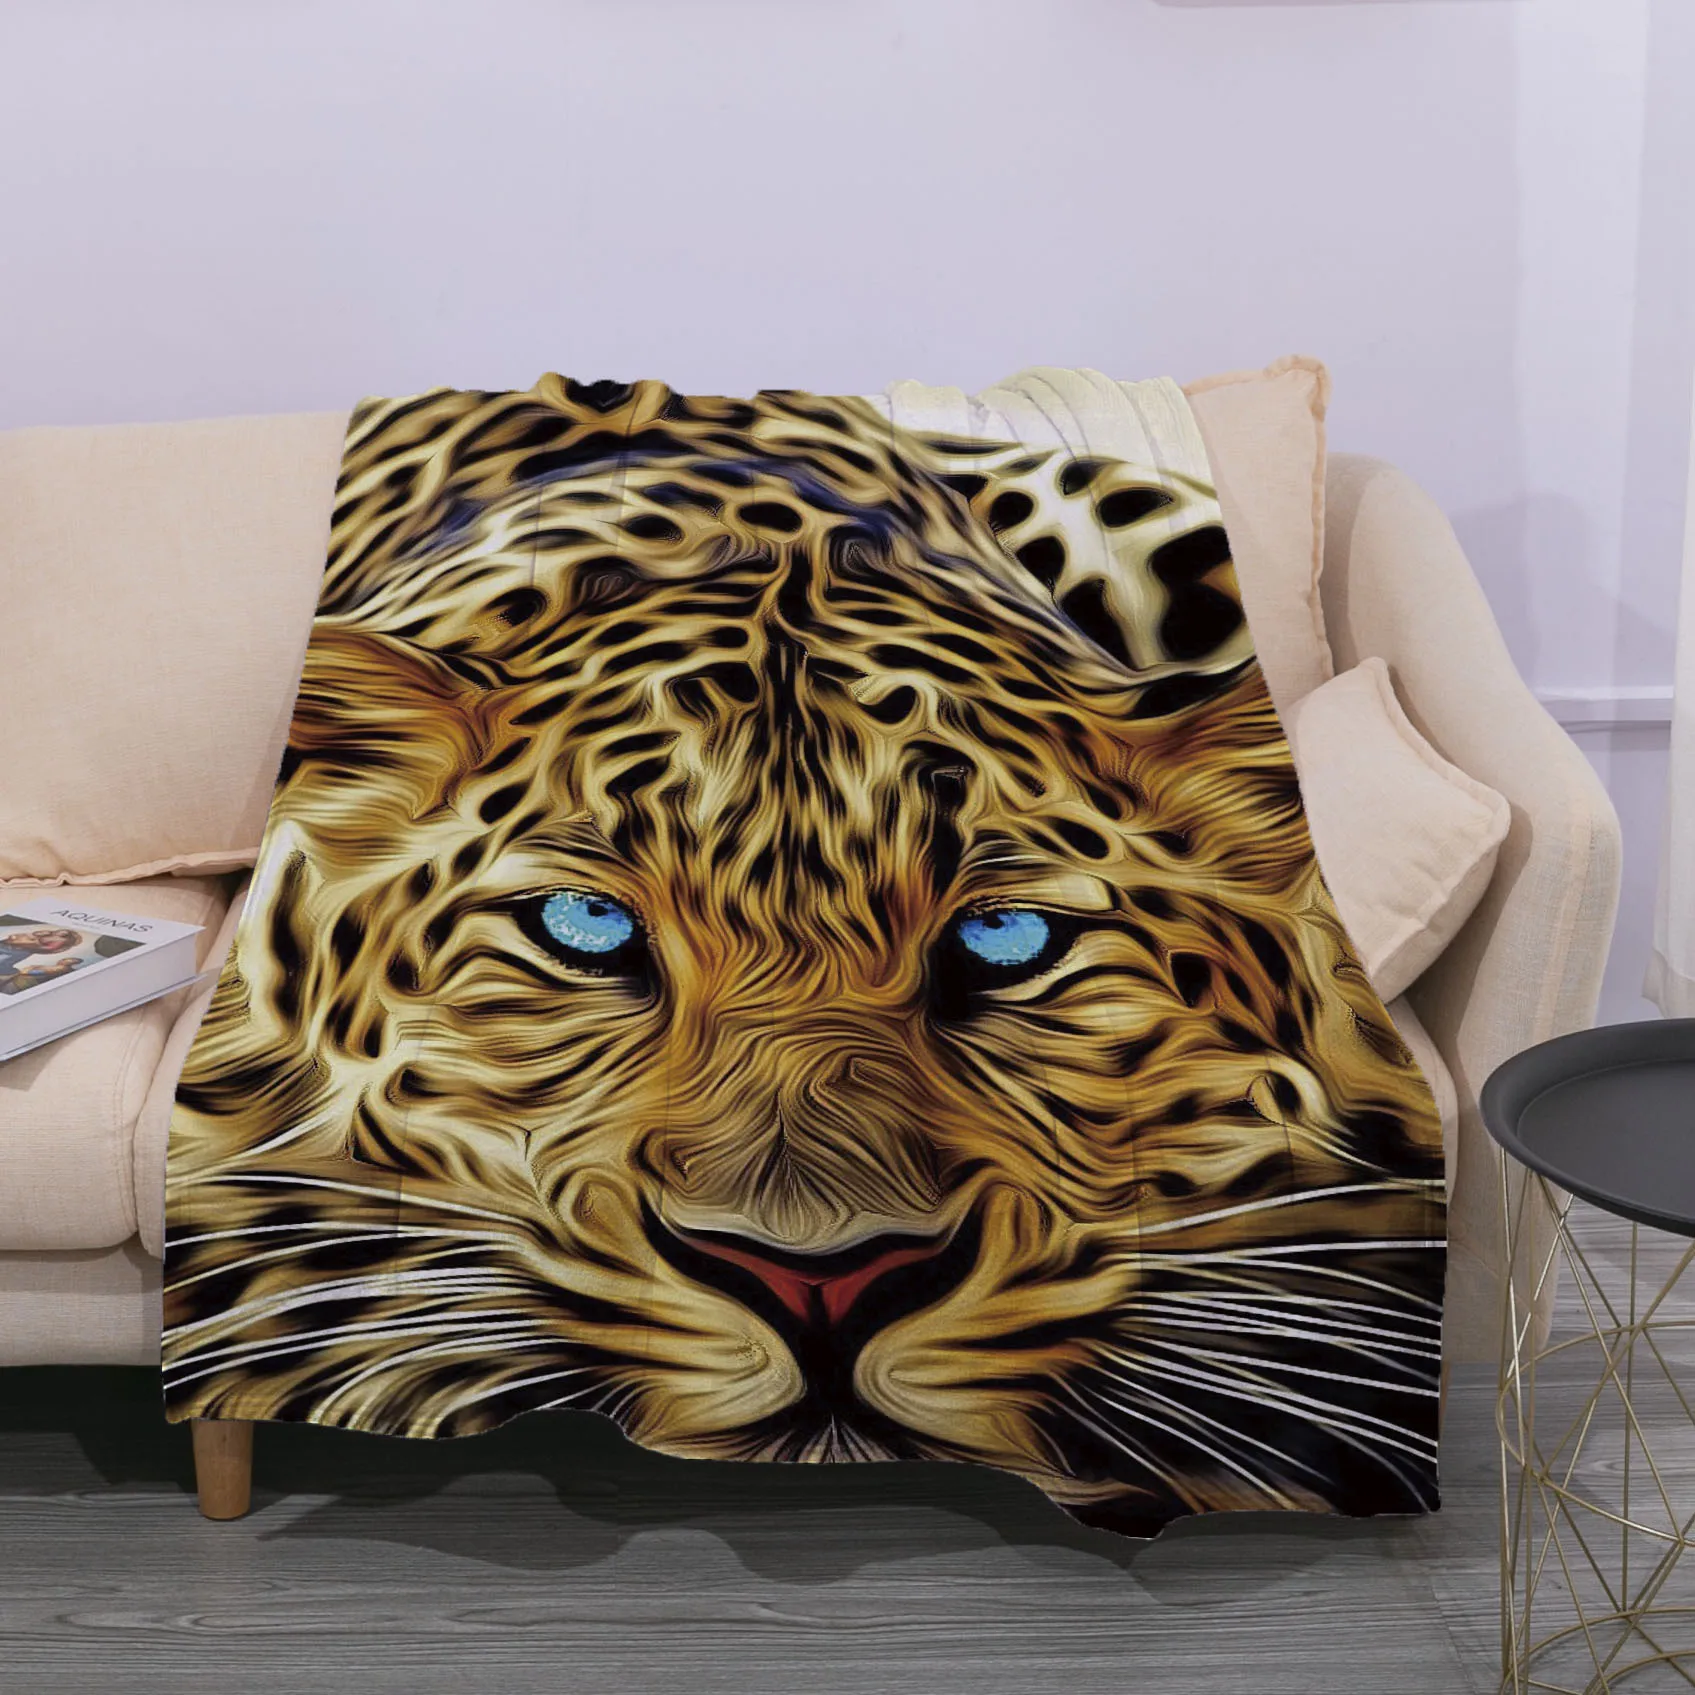 

Tiger 3D Printing Plush Fleece Blanket Adult Fashion Quilts Home Office Washable Duvet Casual Kids Girls Sherpa Blanket animal